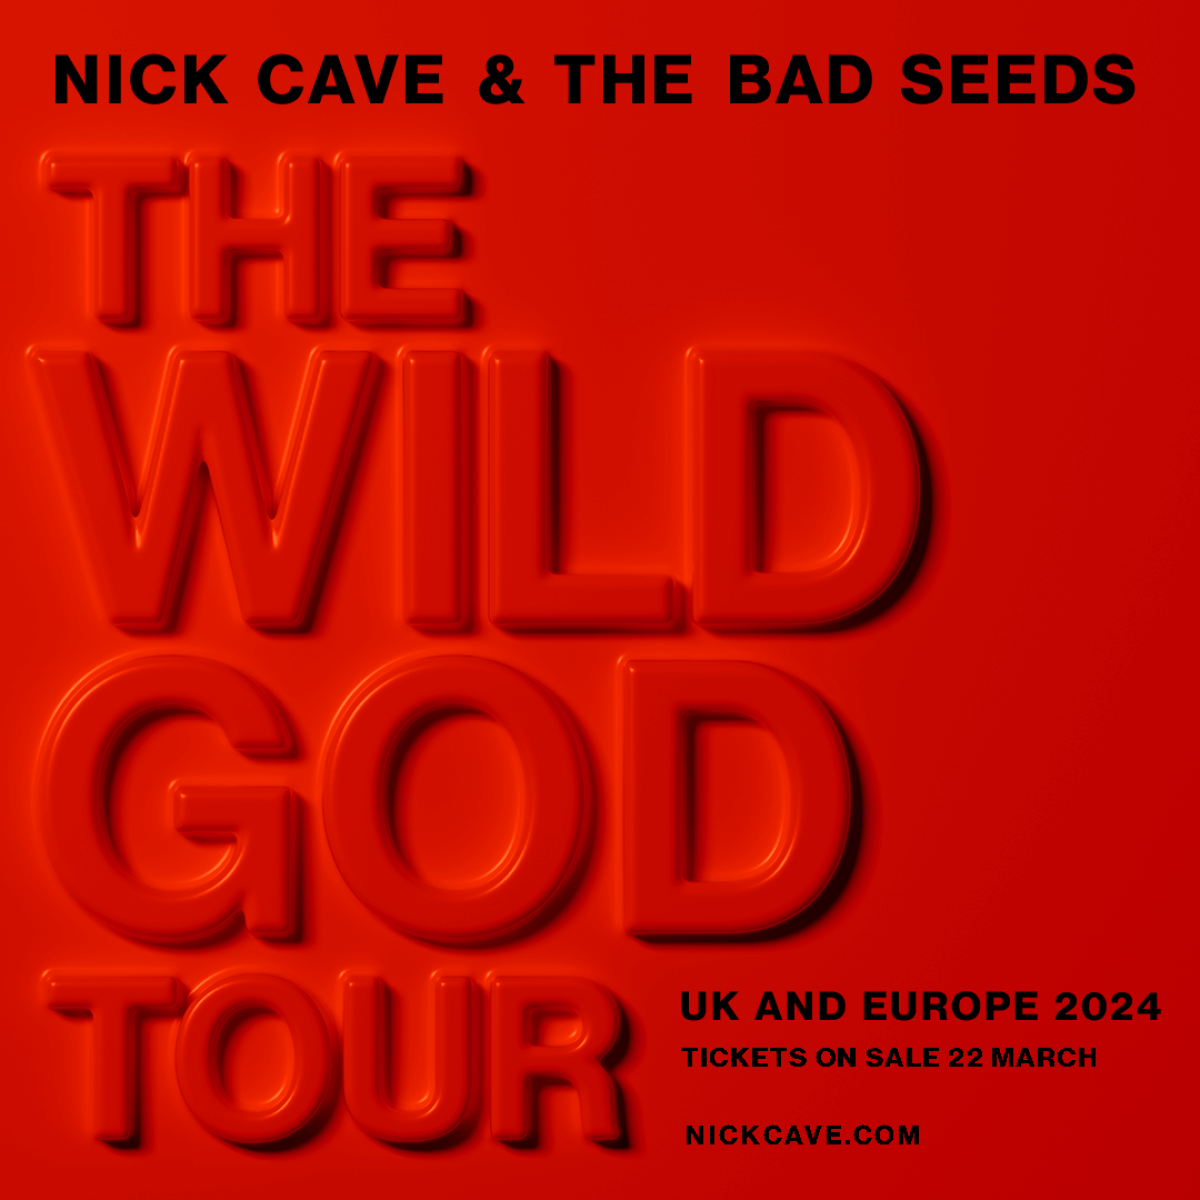 Nick Cave and the Bad Seeds - The Wild God Tour al Barclays Arena Tickets